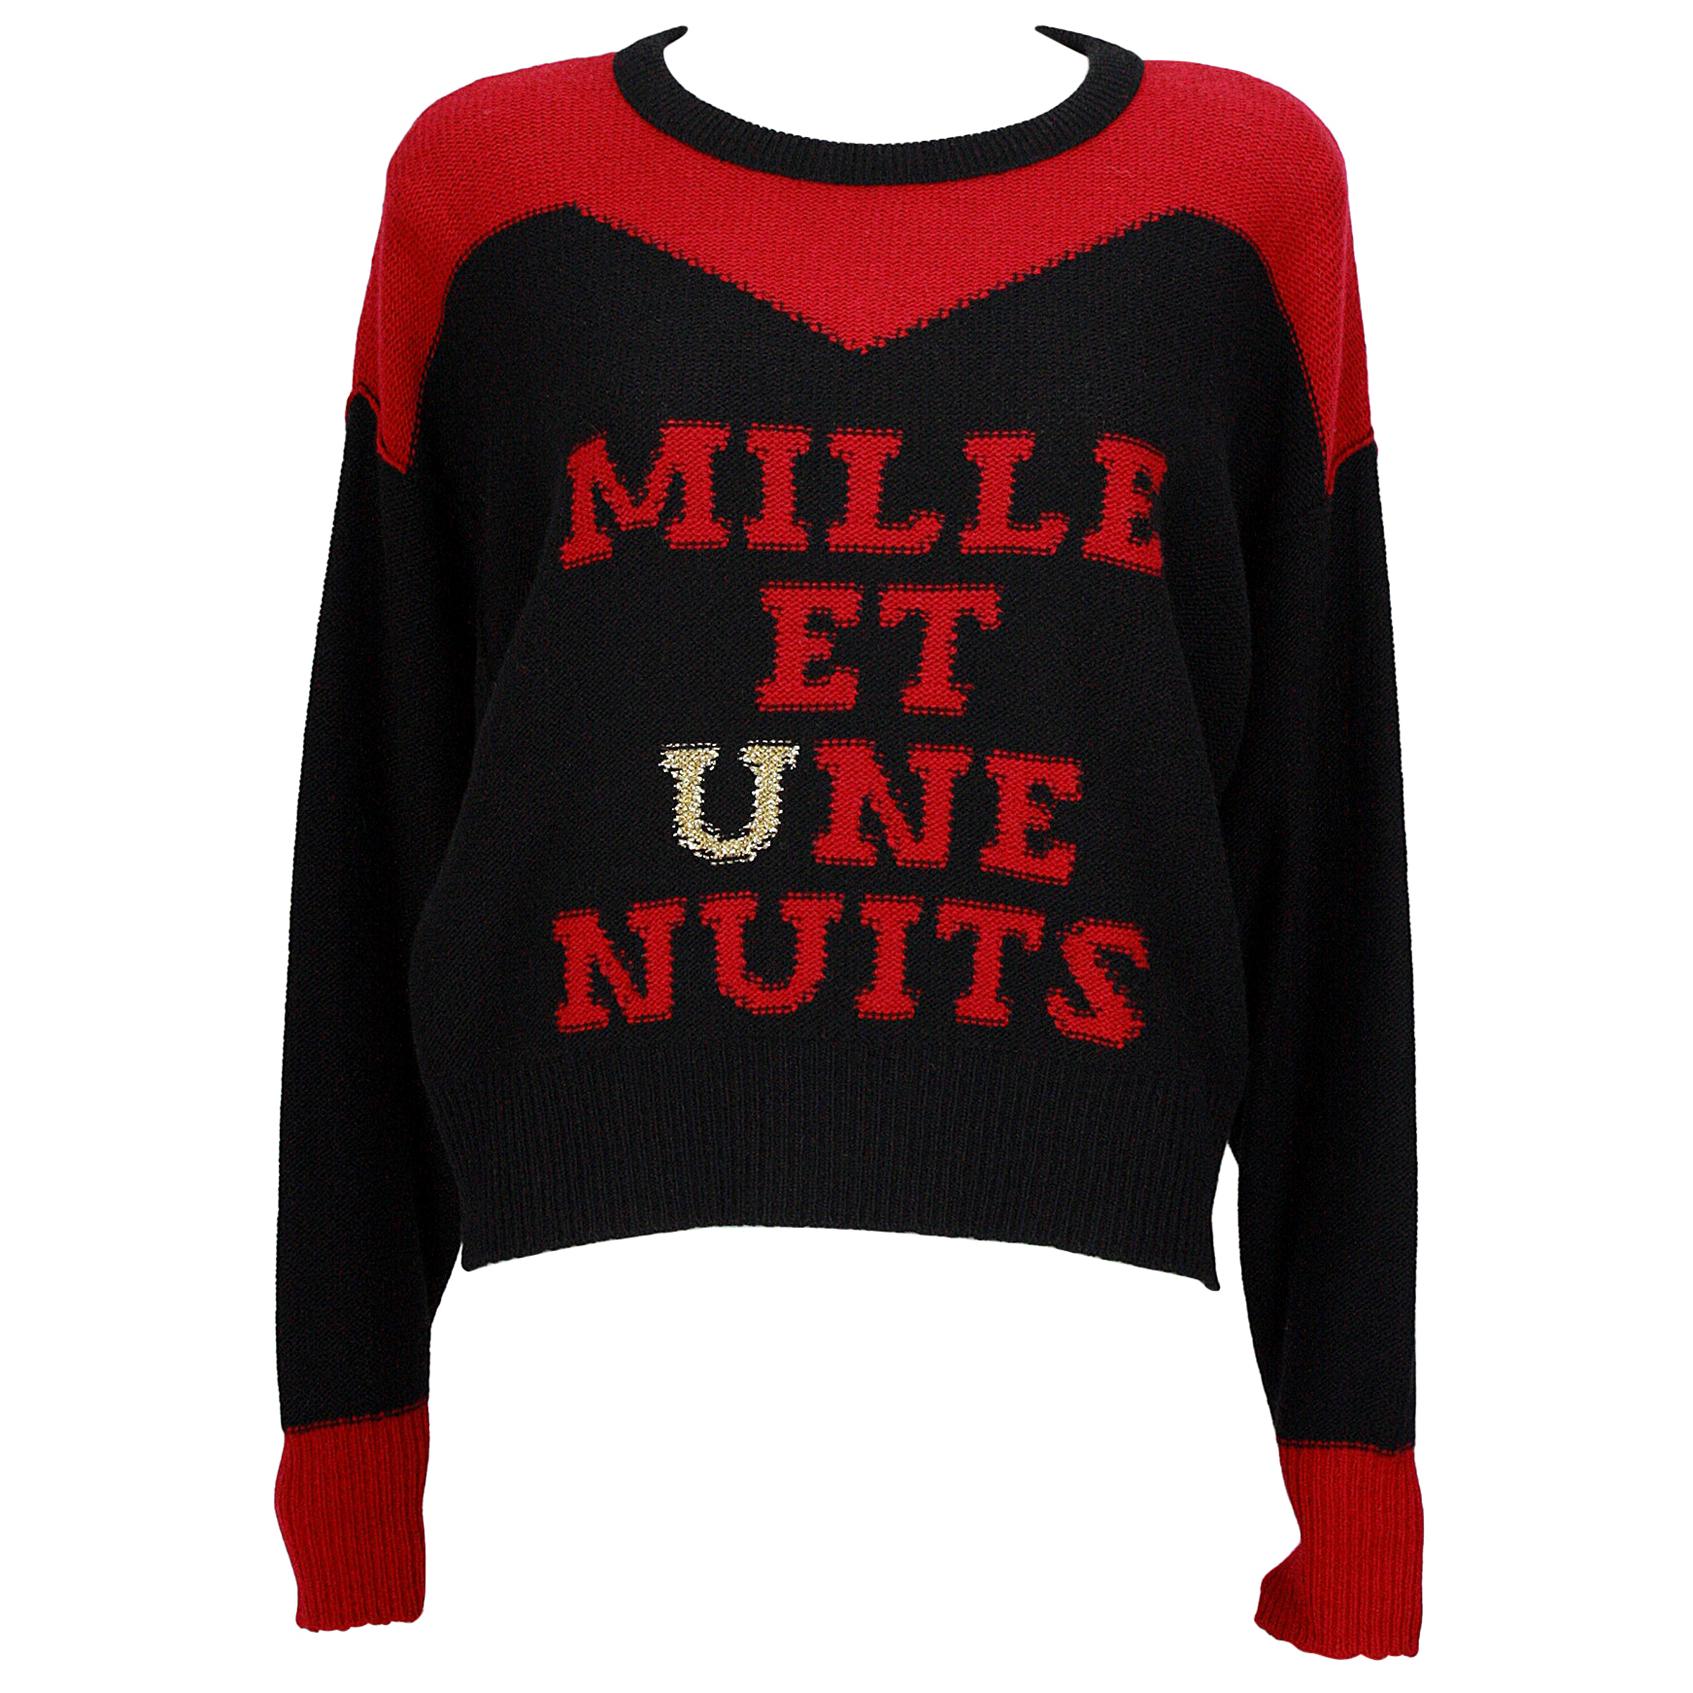 Sonia Rykiel "Mille Et Une Nuits" Red and Black Wool Sweater